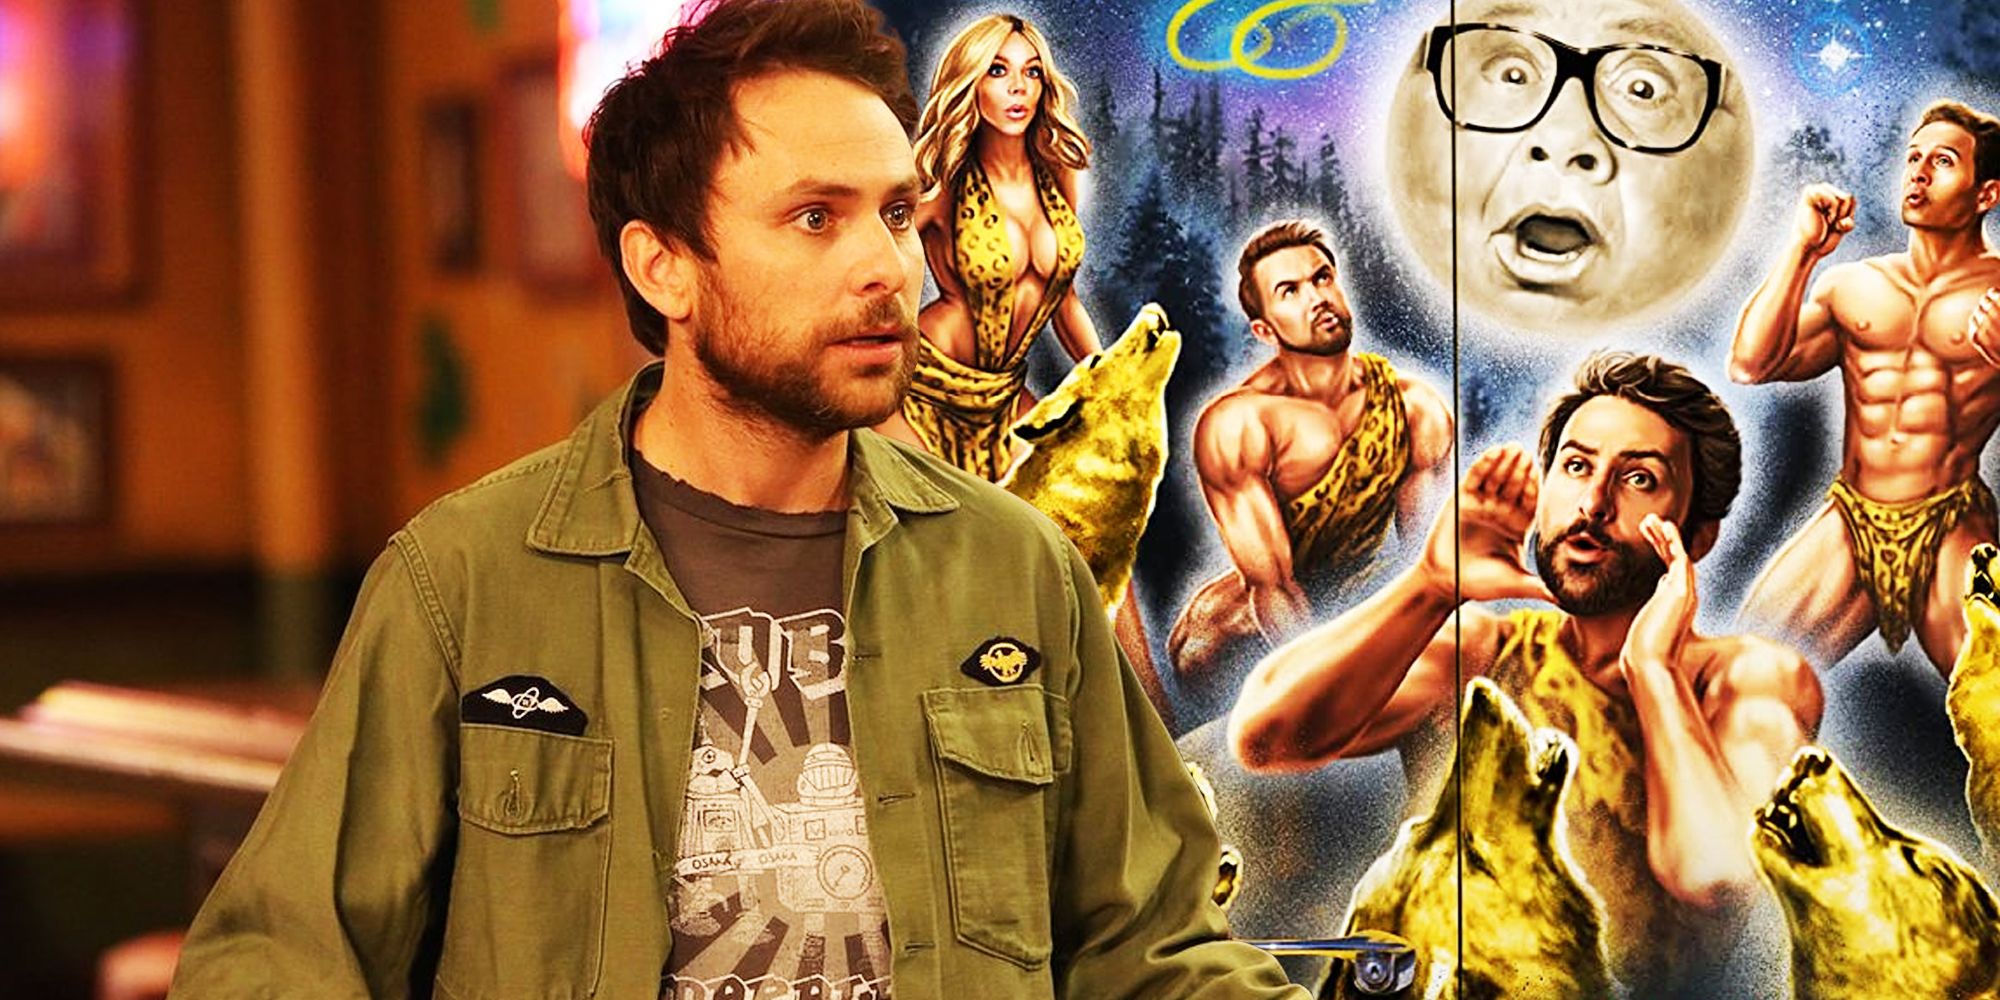 Charlie Kelly and the Always Sunny season 16 poster